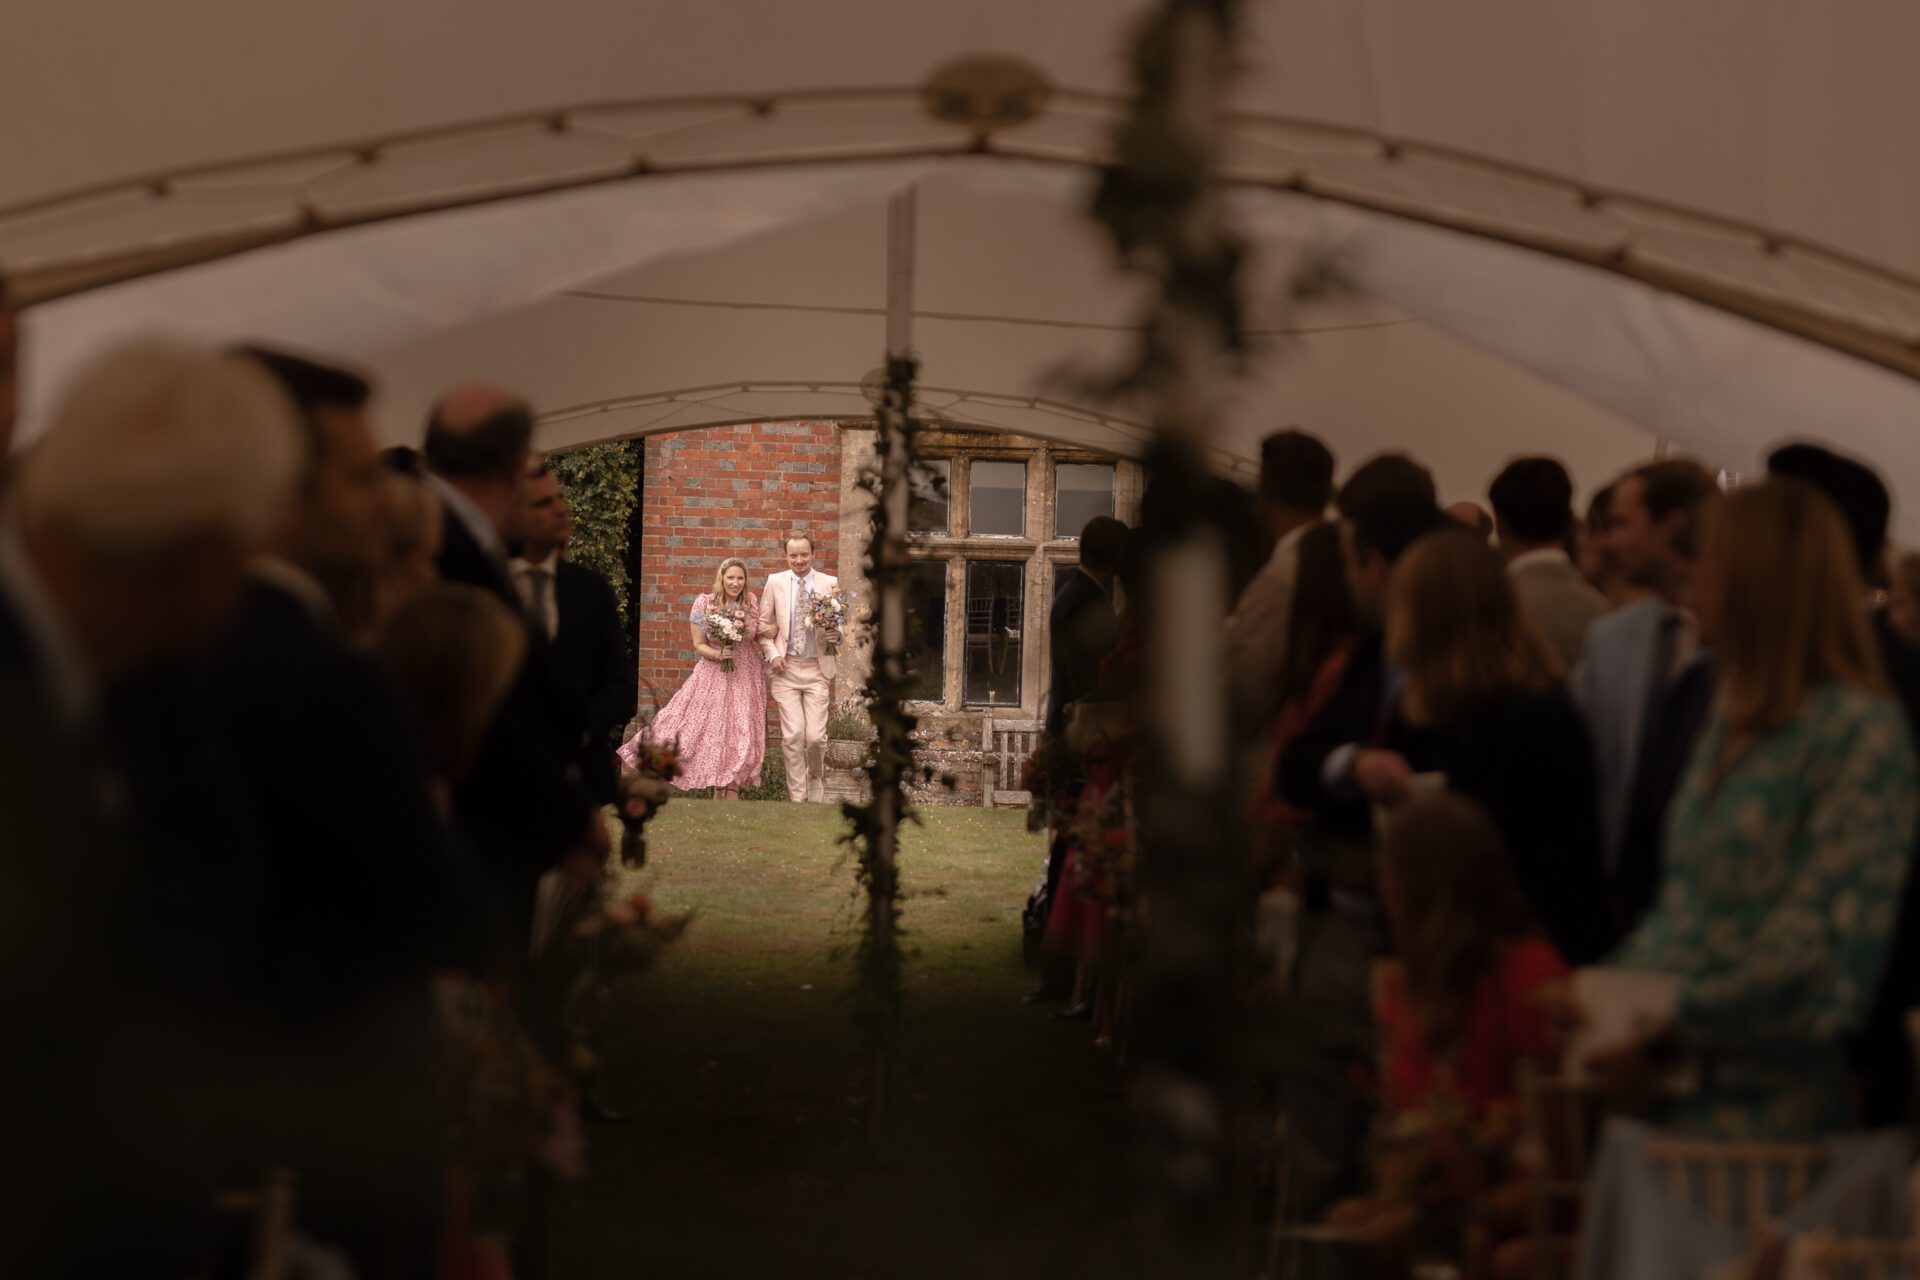 The bridal party join the marquee wedding ceremony at Brickwall House